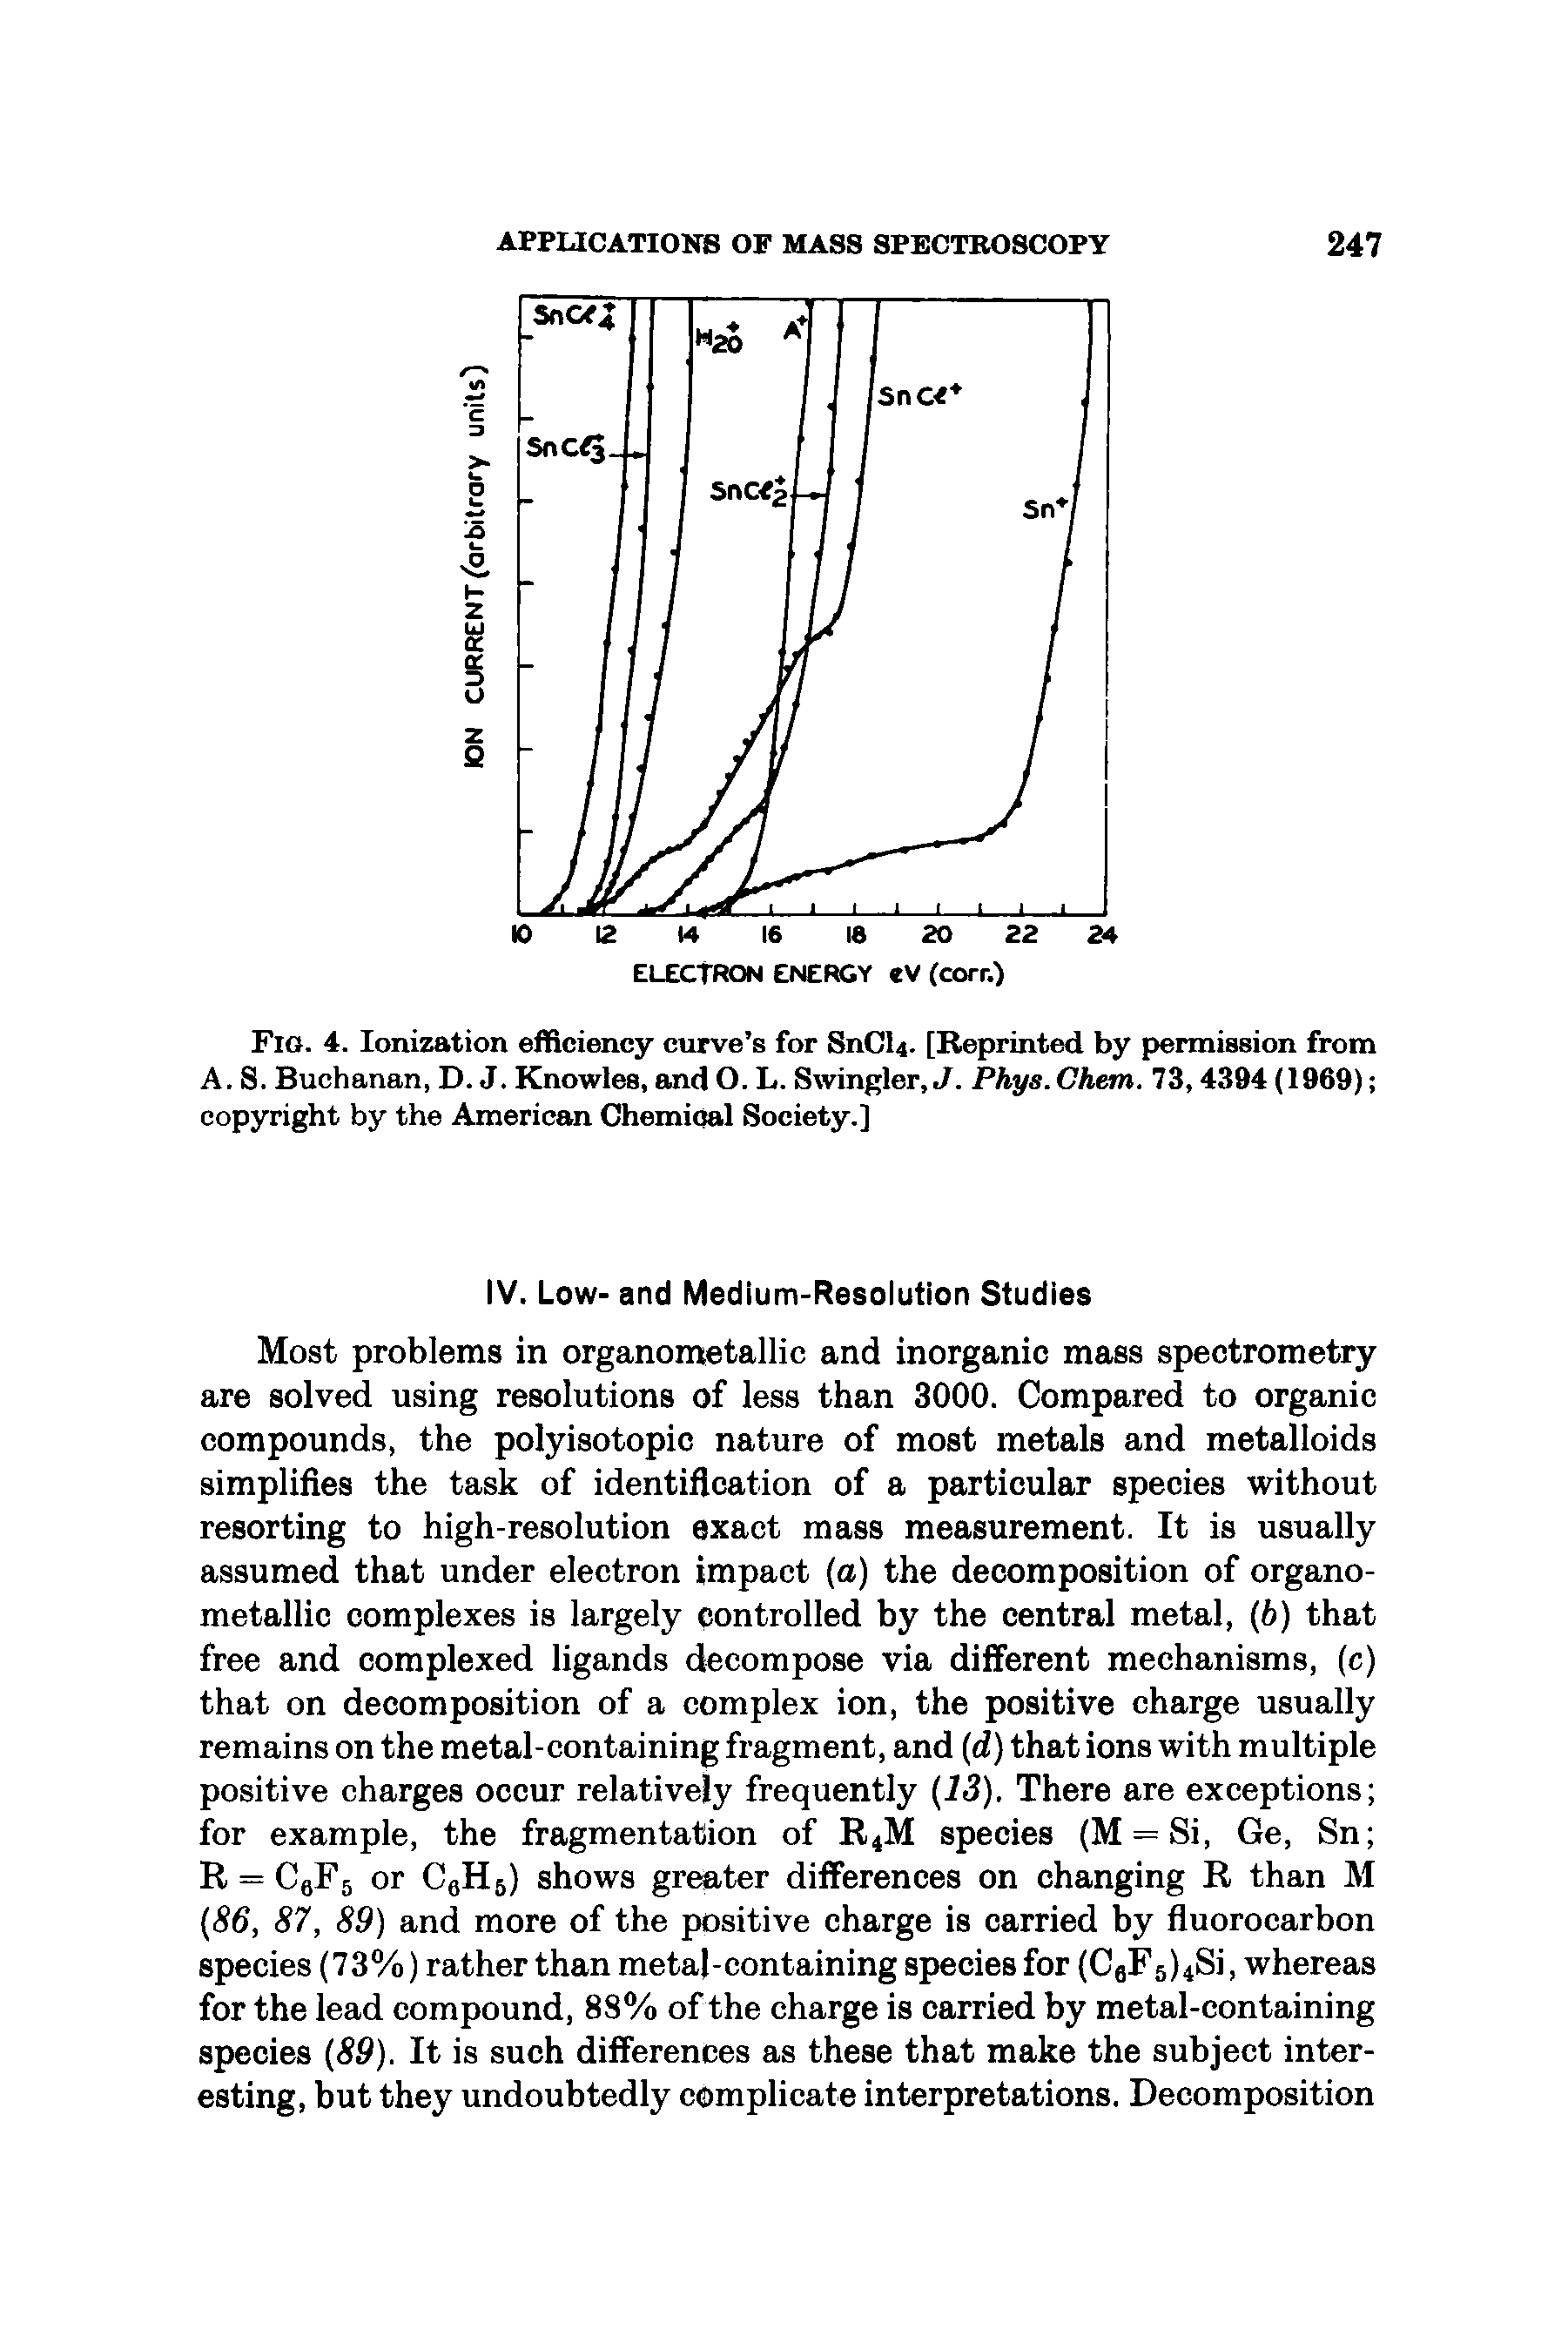 Fig. 4. Ionization efficiency curve s for SnCU. [Reprinted by permission from A. S. Buchanan, D. J. Knowles, and O. L. Swingler, J. Phys.Chem. 73,4394 (1969) copyright by the American Chemical Society.]...